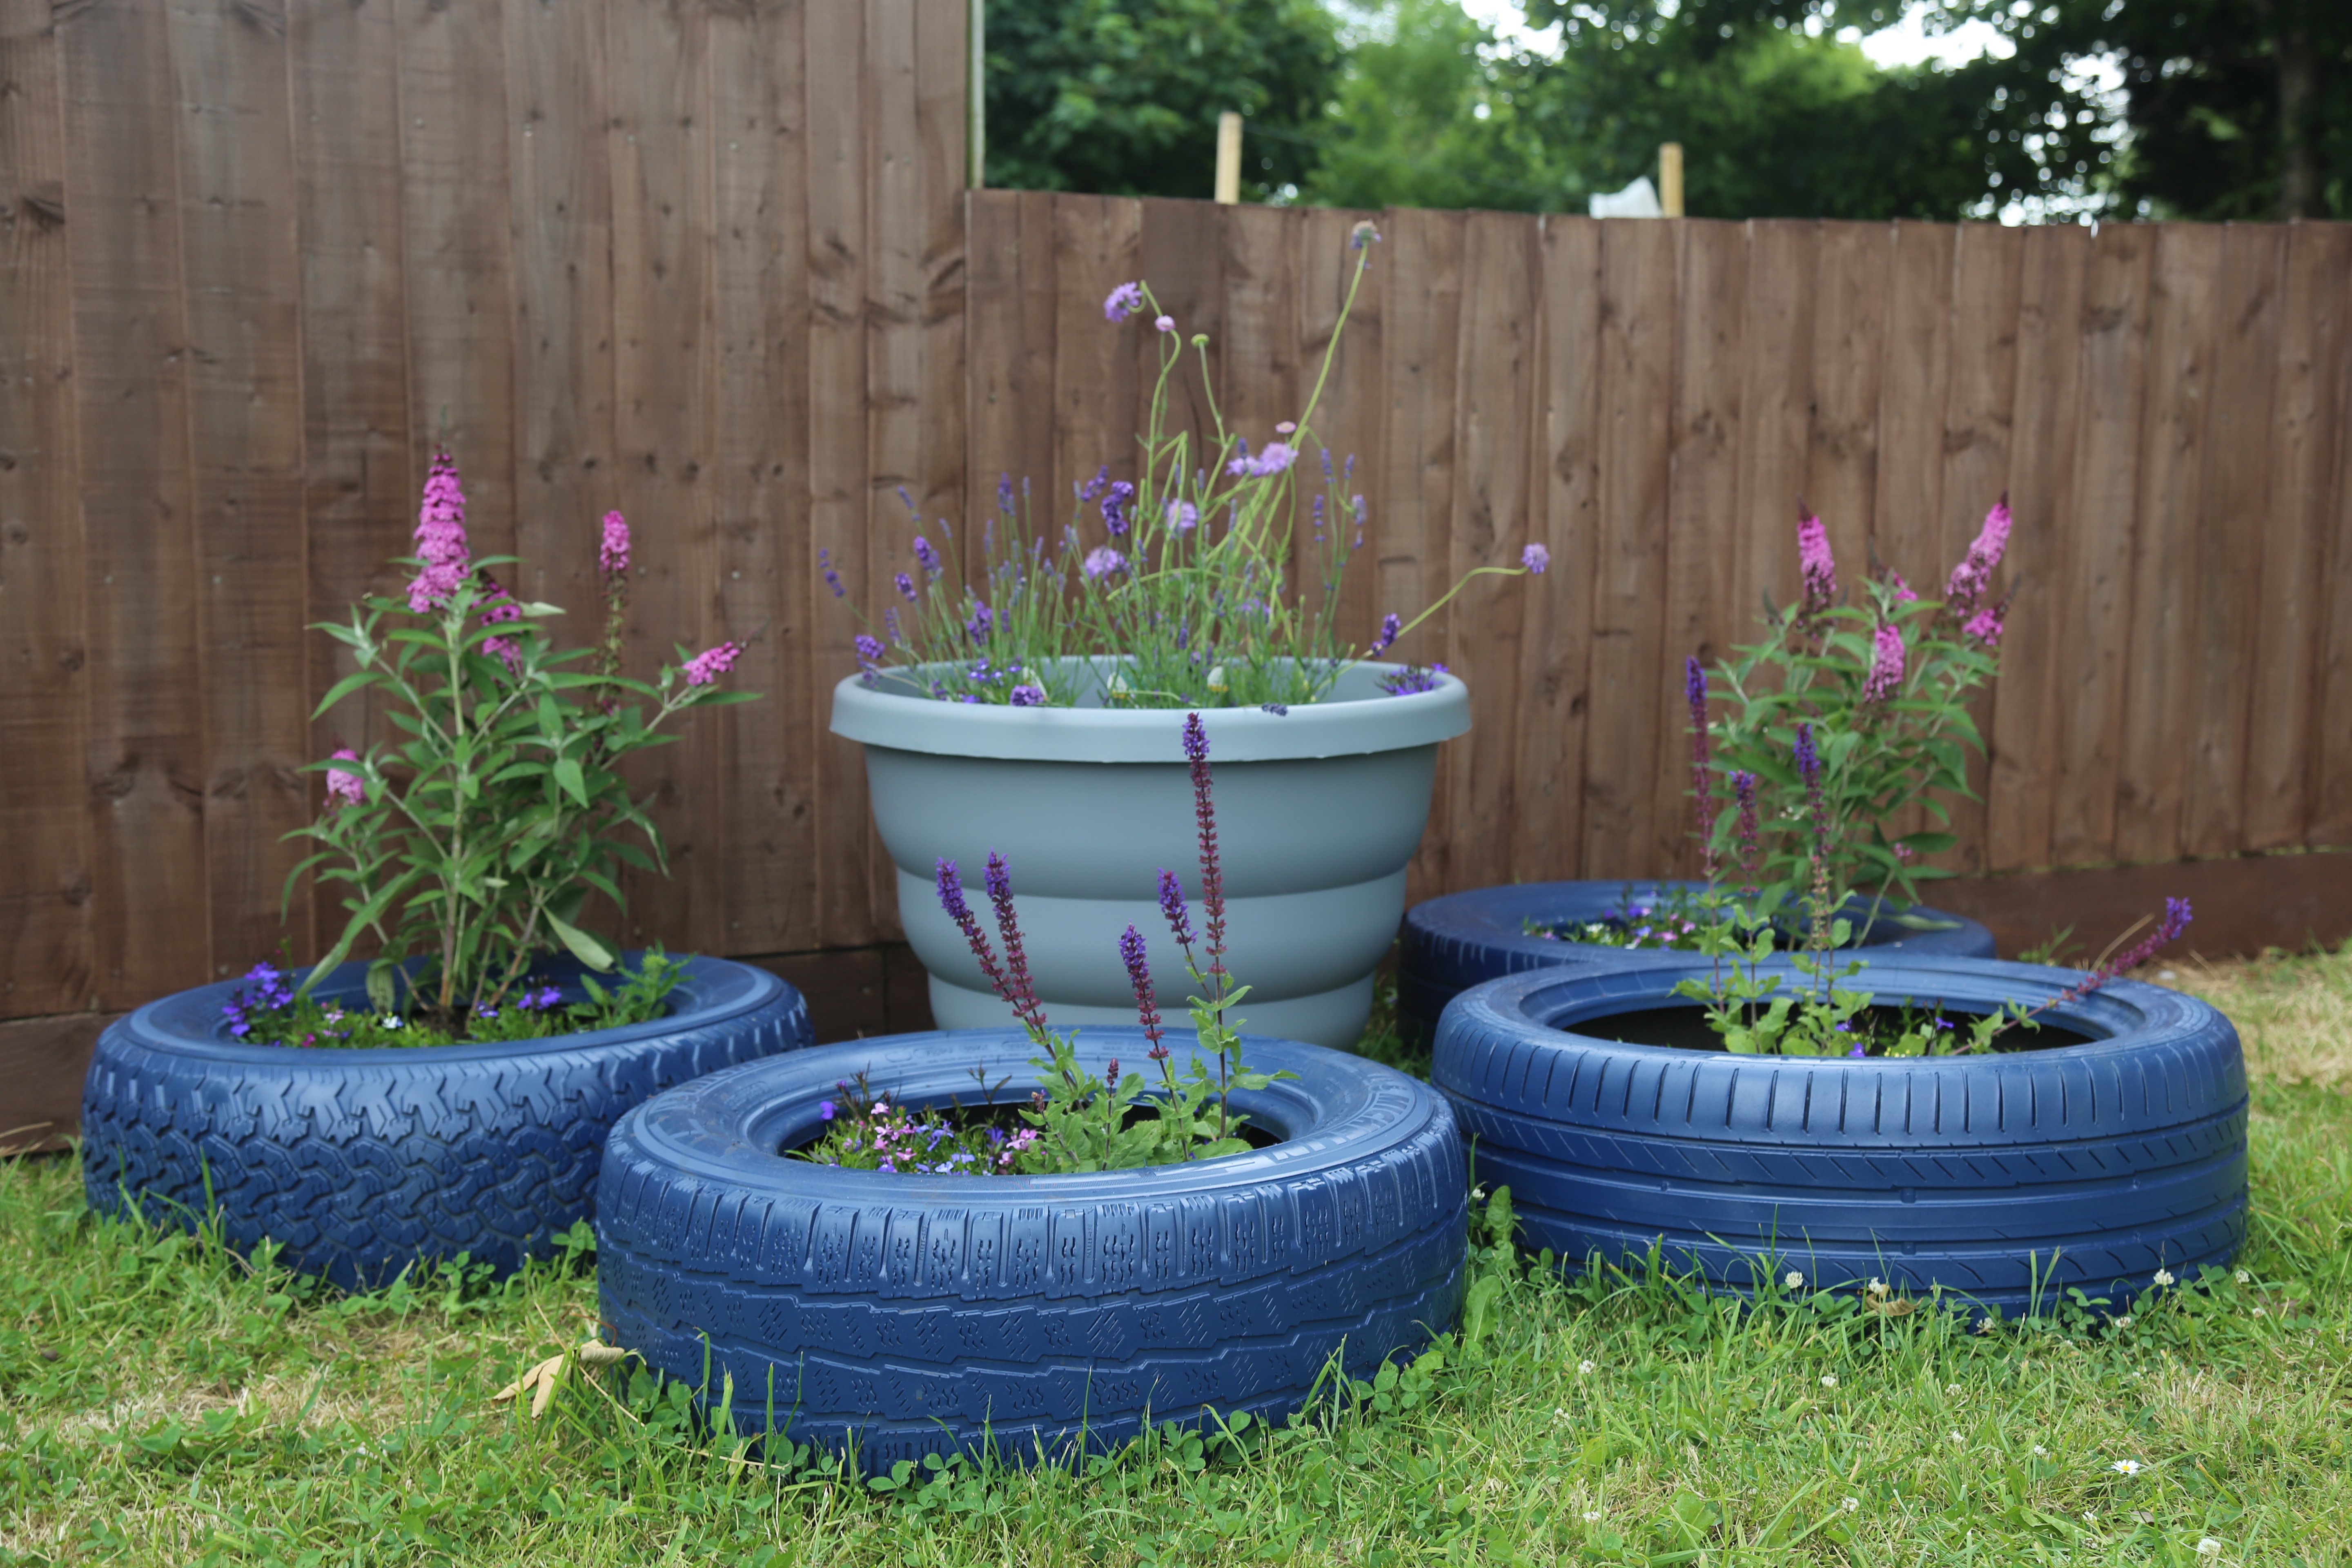 Flowers planted in upcycled tyres